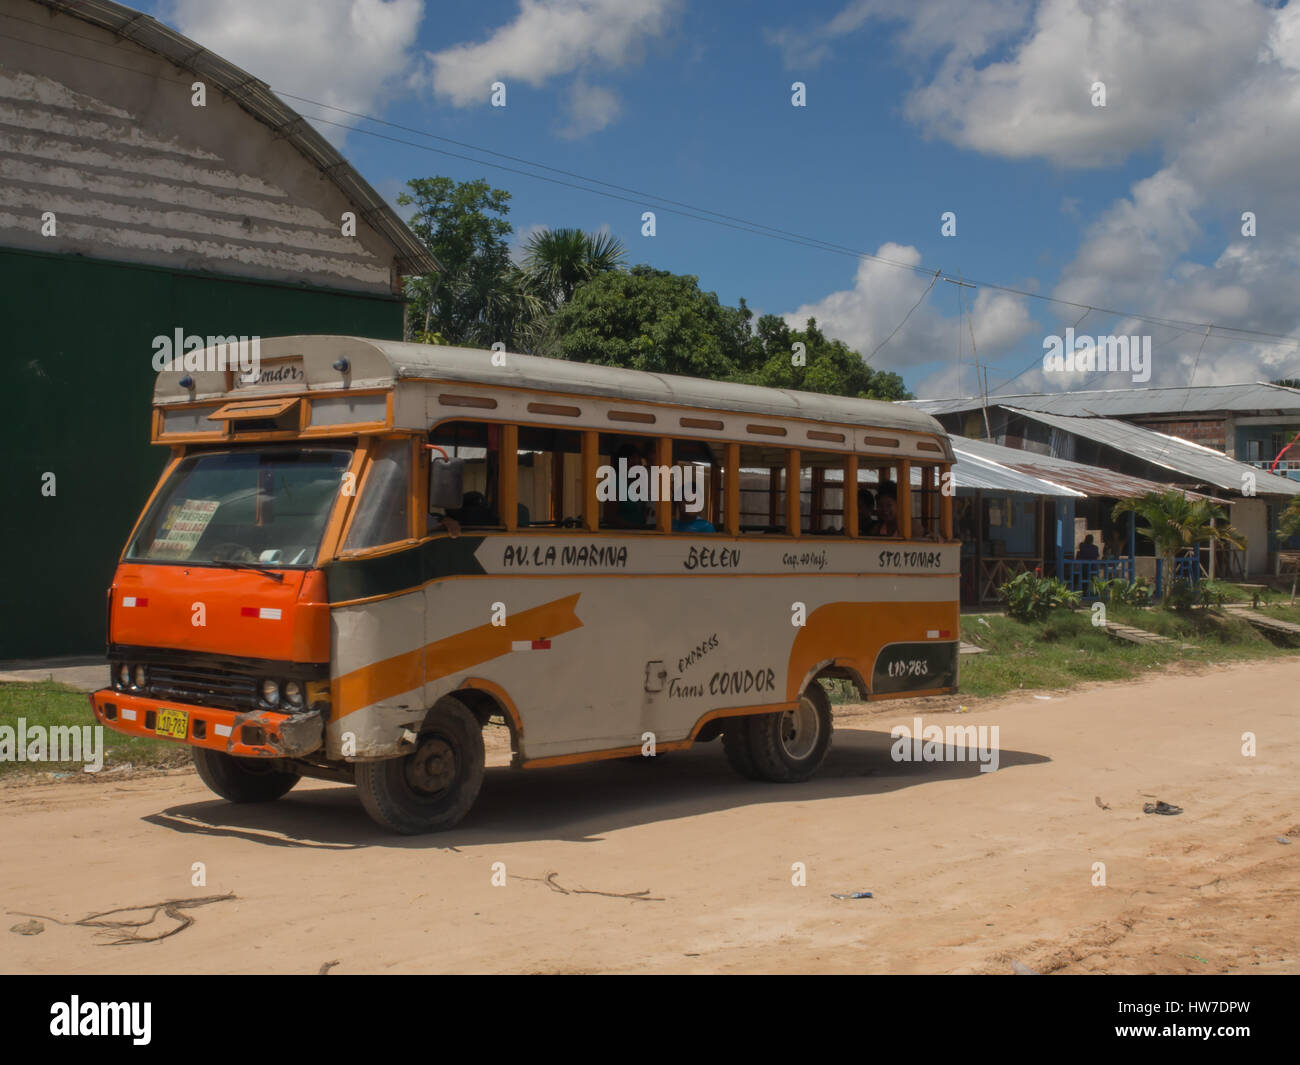 Santo Tomas, Peru  - May 17, 2016: Corolful bus on street of a small southern town. Stock Photo